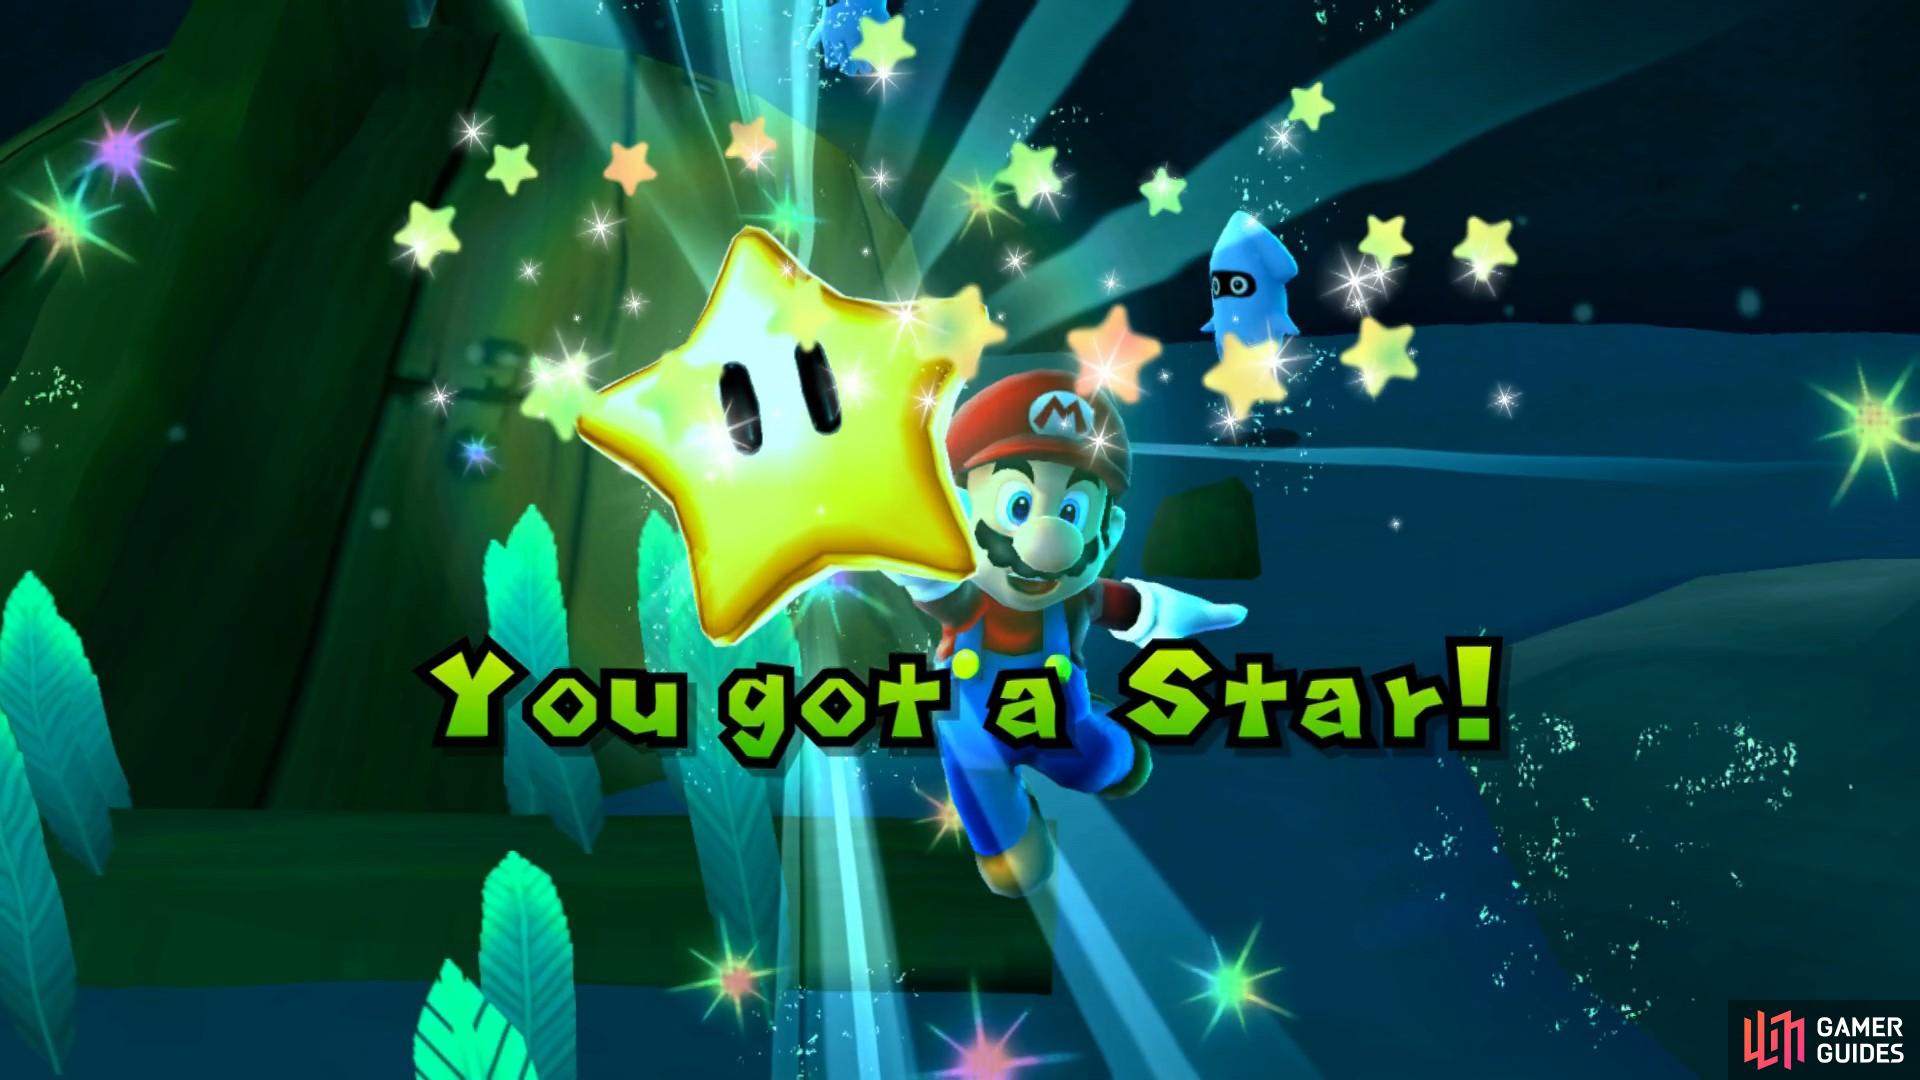 Grab the Star once you've completed Guppy's challenge to finish the level.